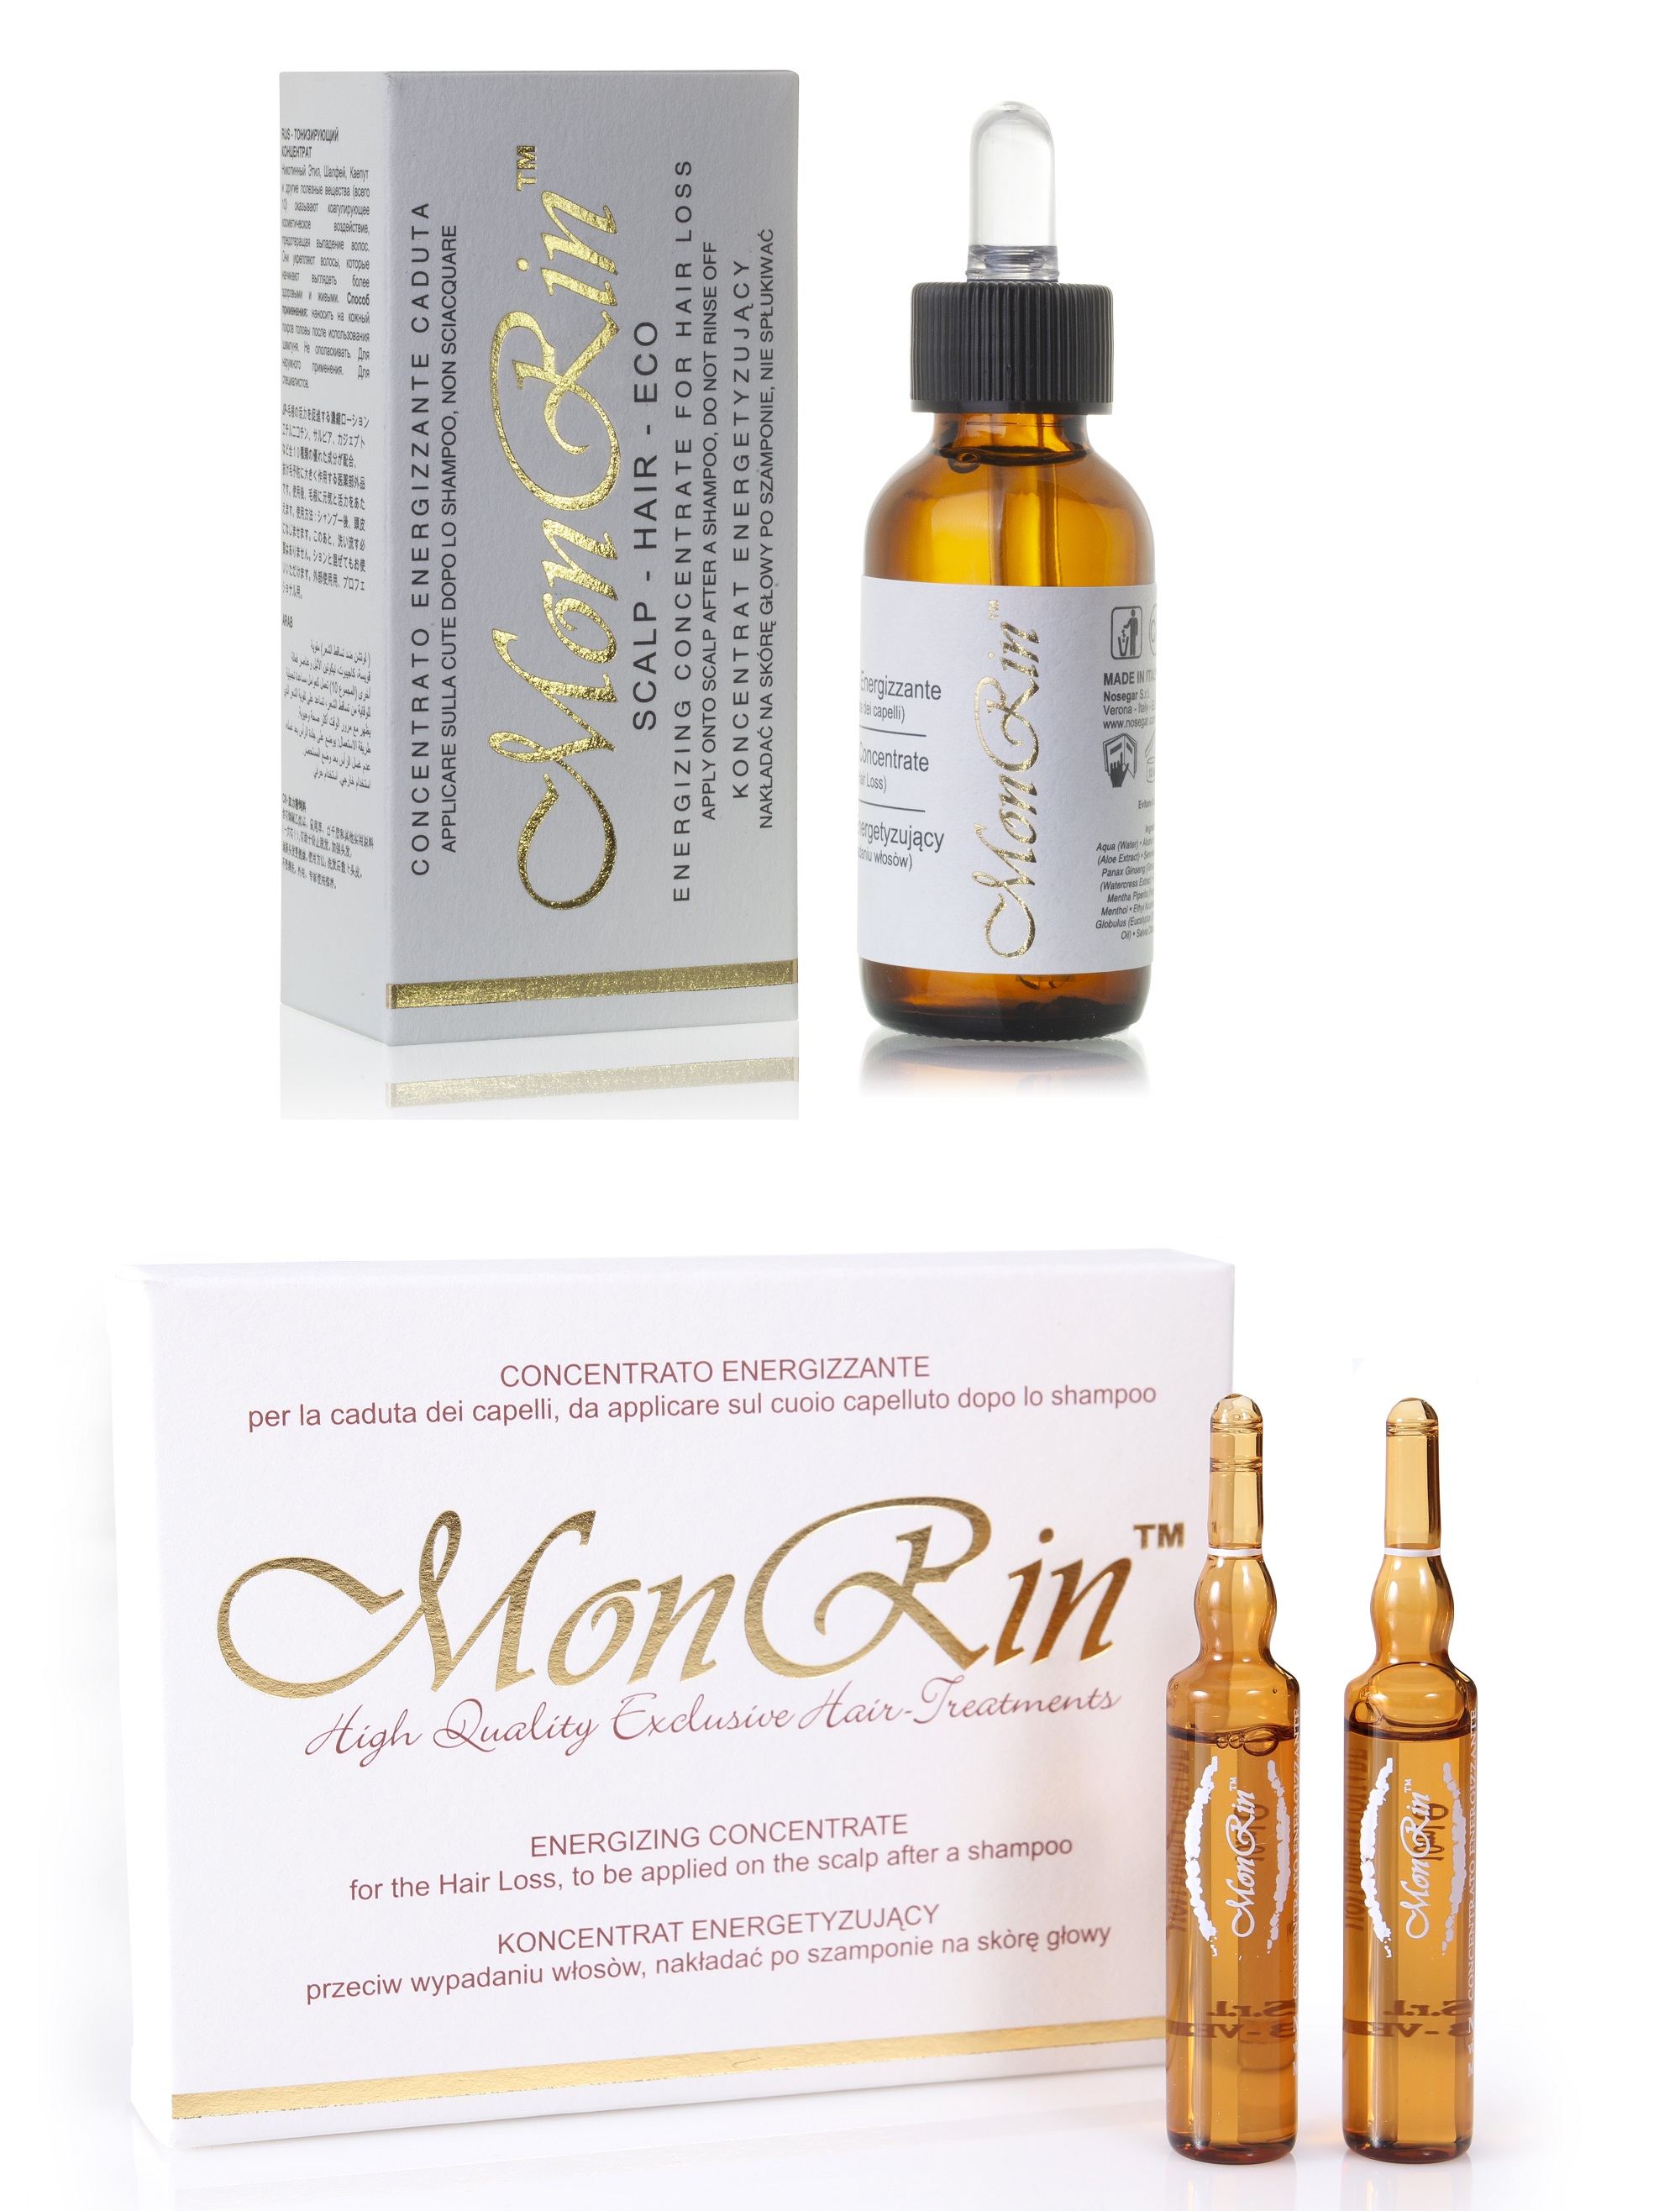 Monrin Energizing Concentrate with 10 active ingredients 